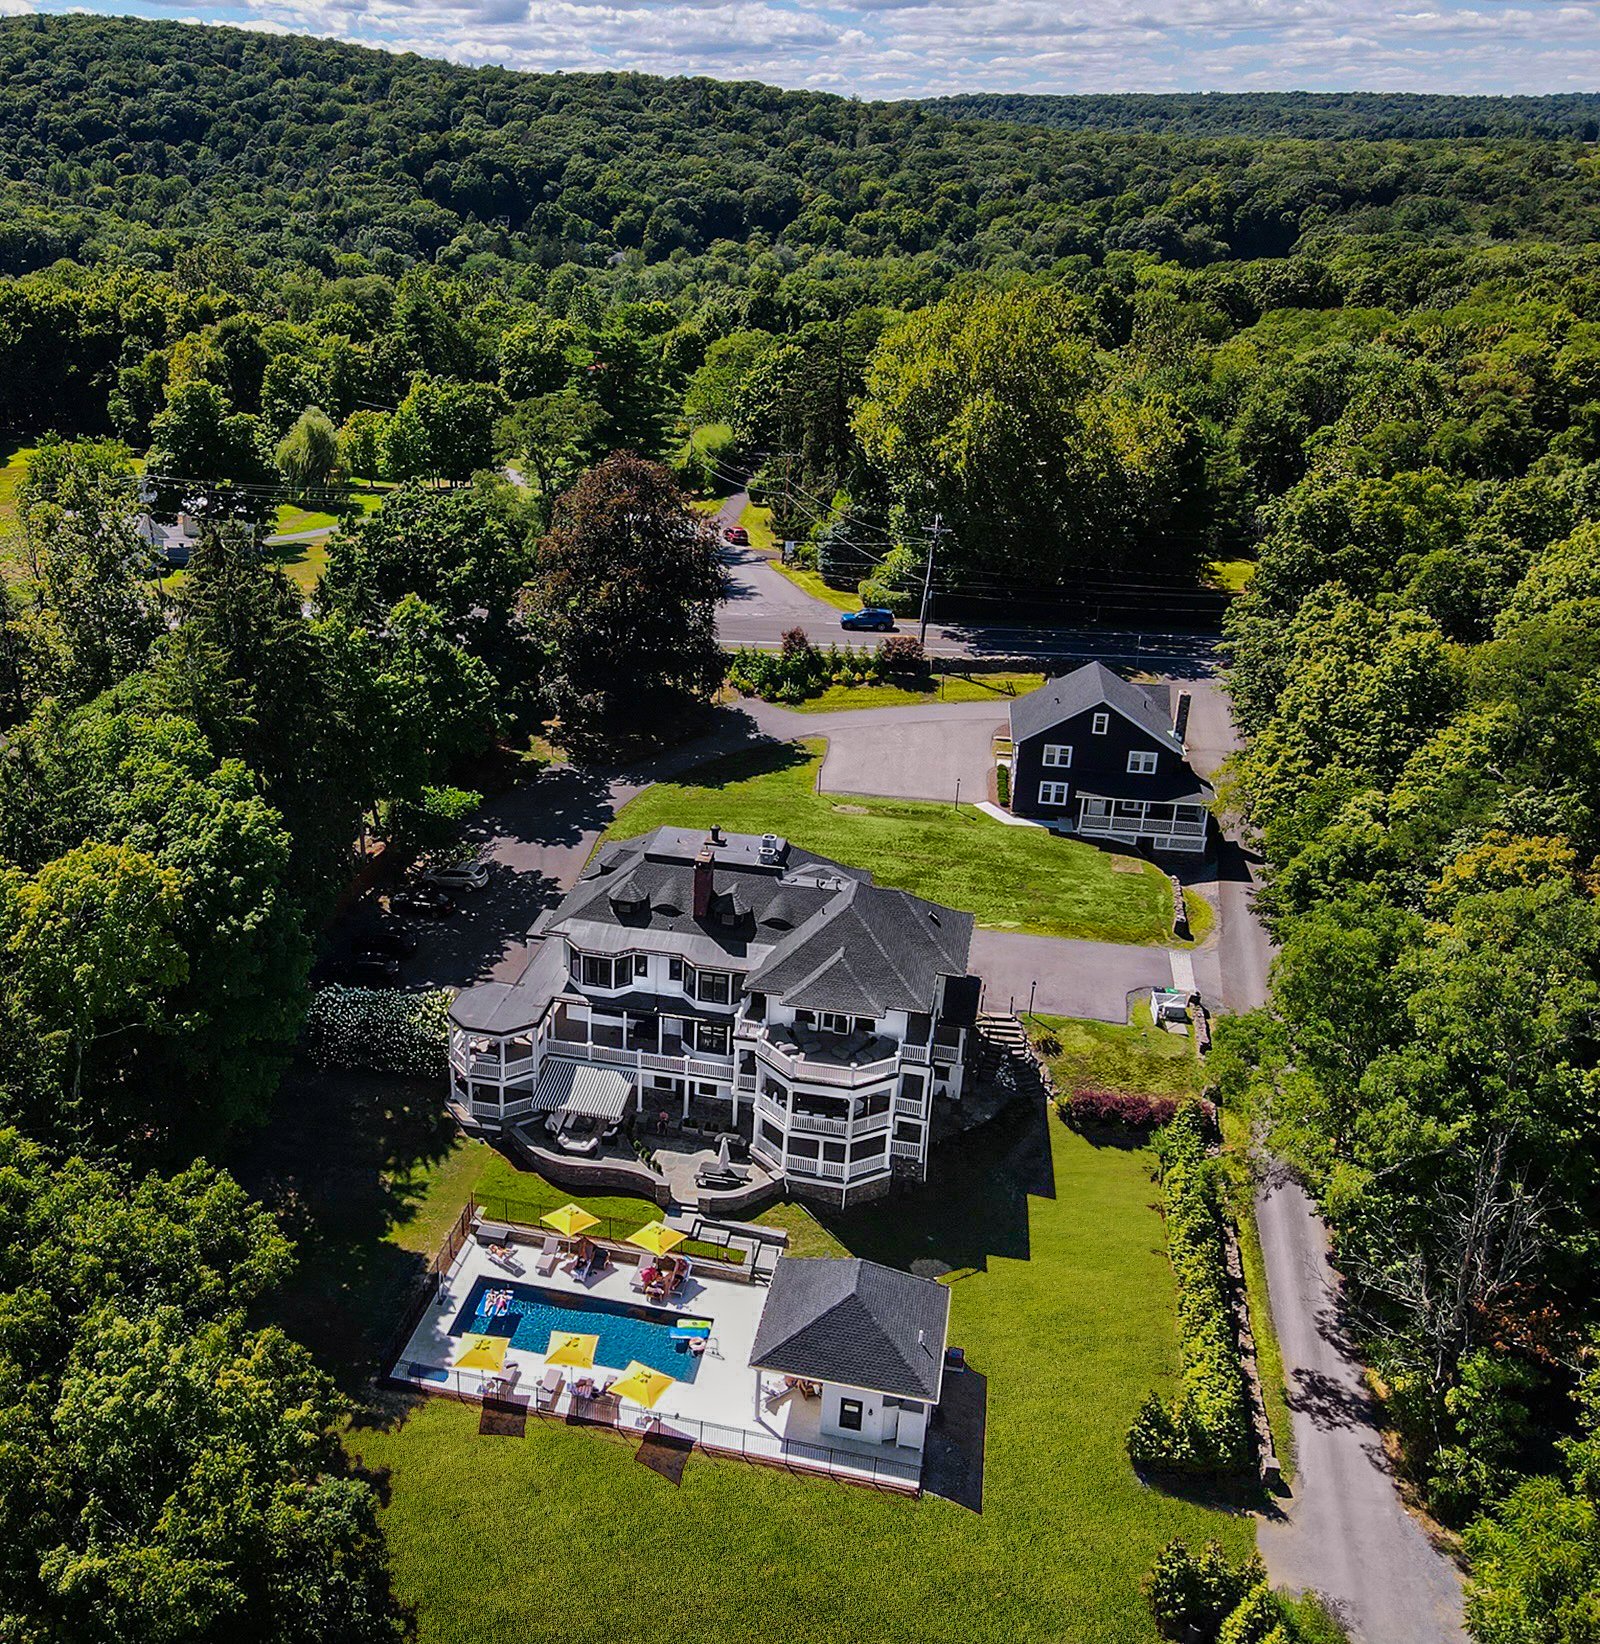  A renovated historic mansion in the heart of the Hudson Valley. Very accommodating for productions of all size with overnight accommodations available in 8 bedrooms.  20 parking spaces with overflow across the street.   115 miles to Columbus Circle 